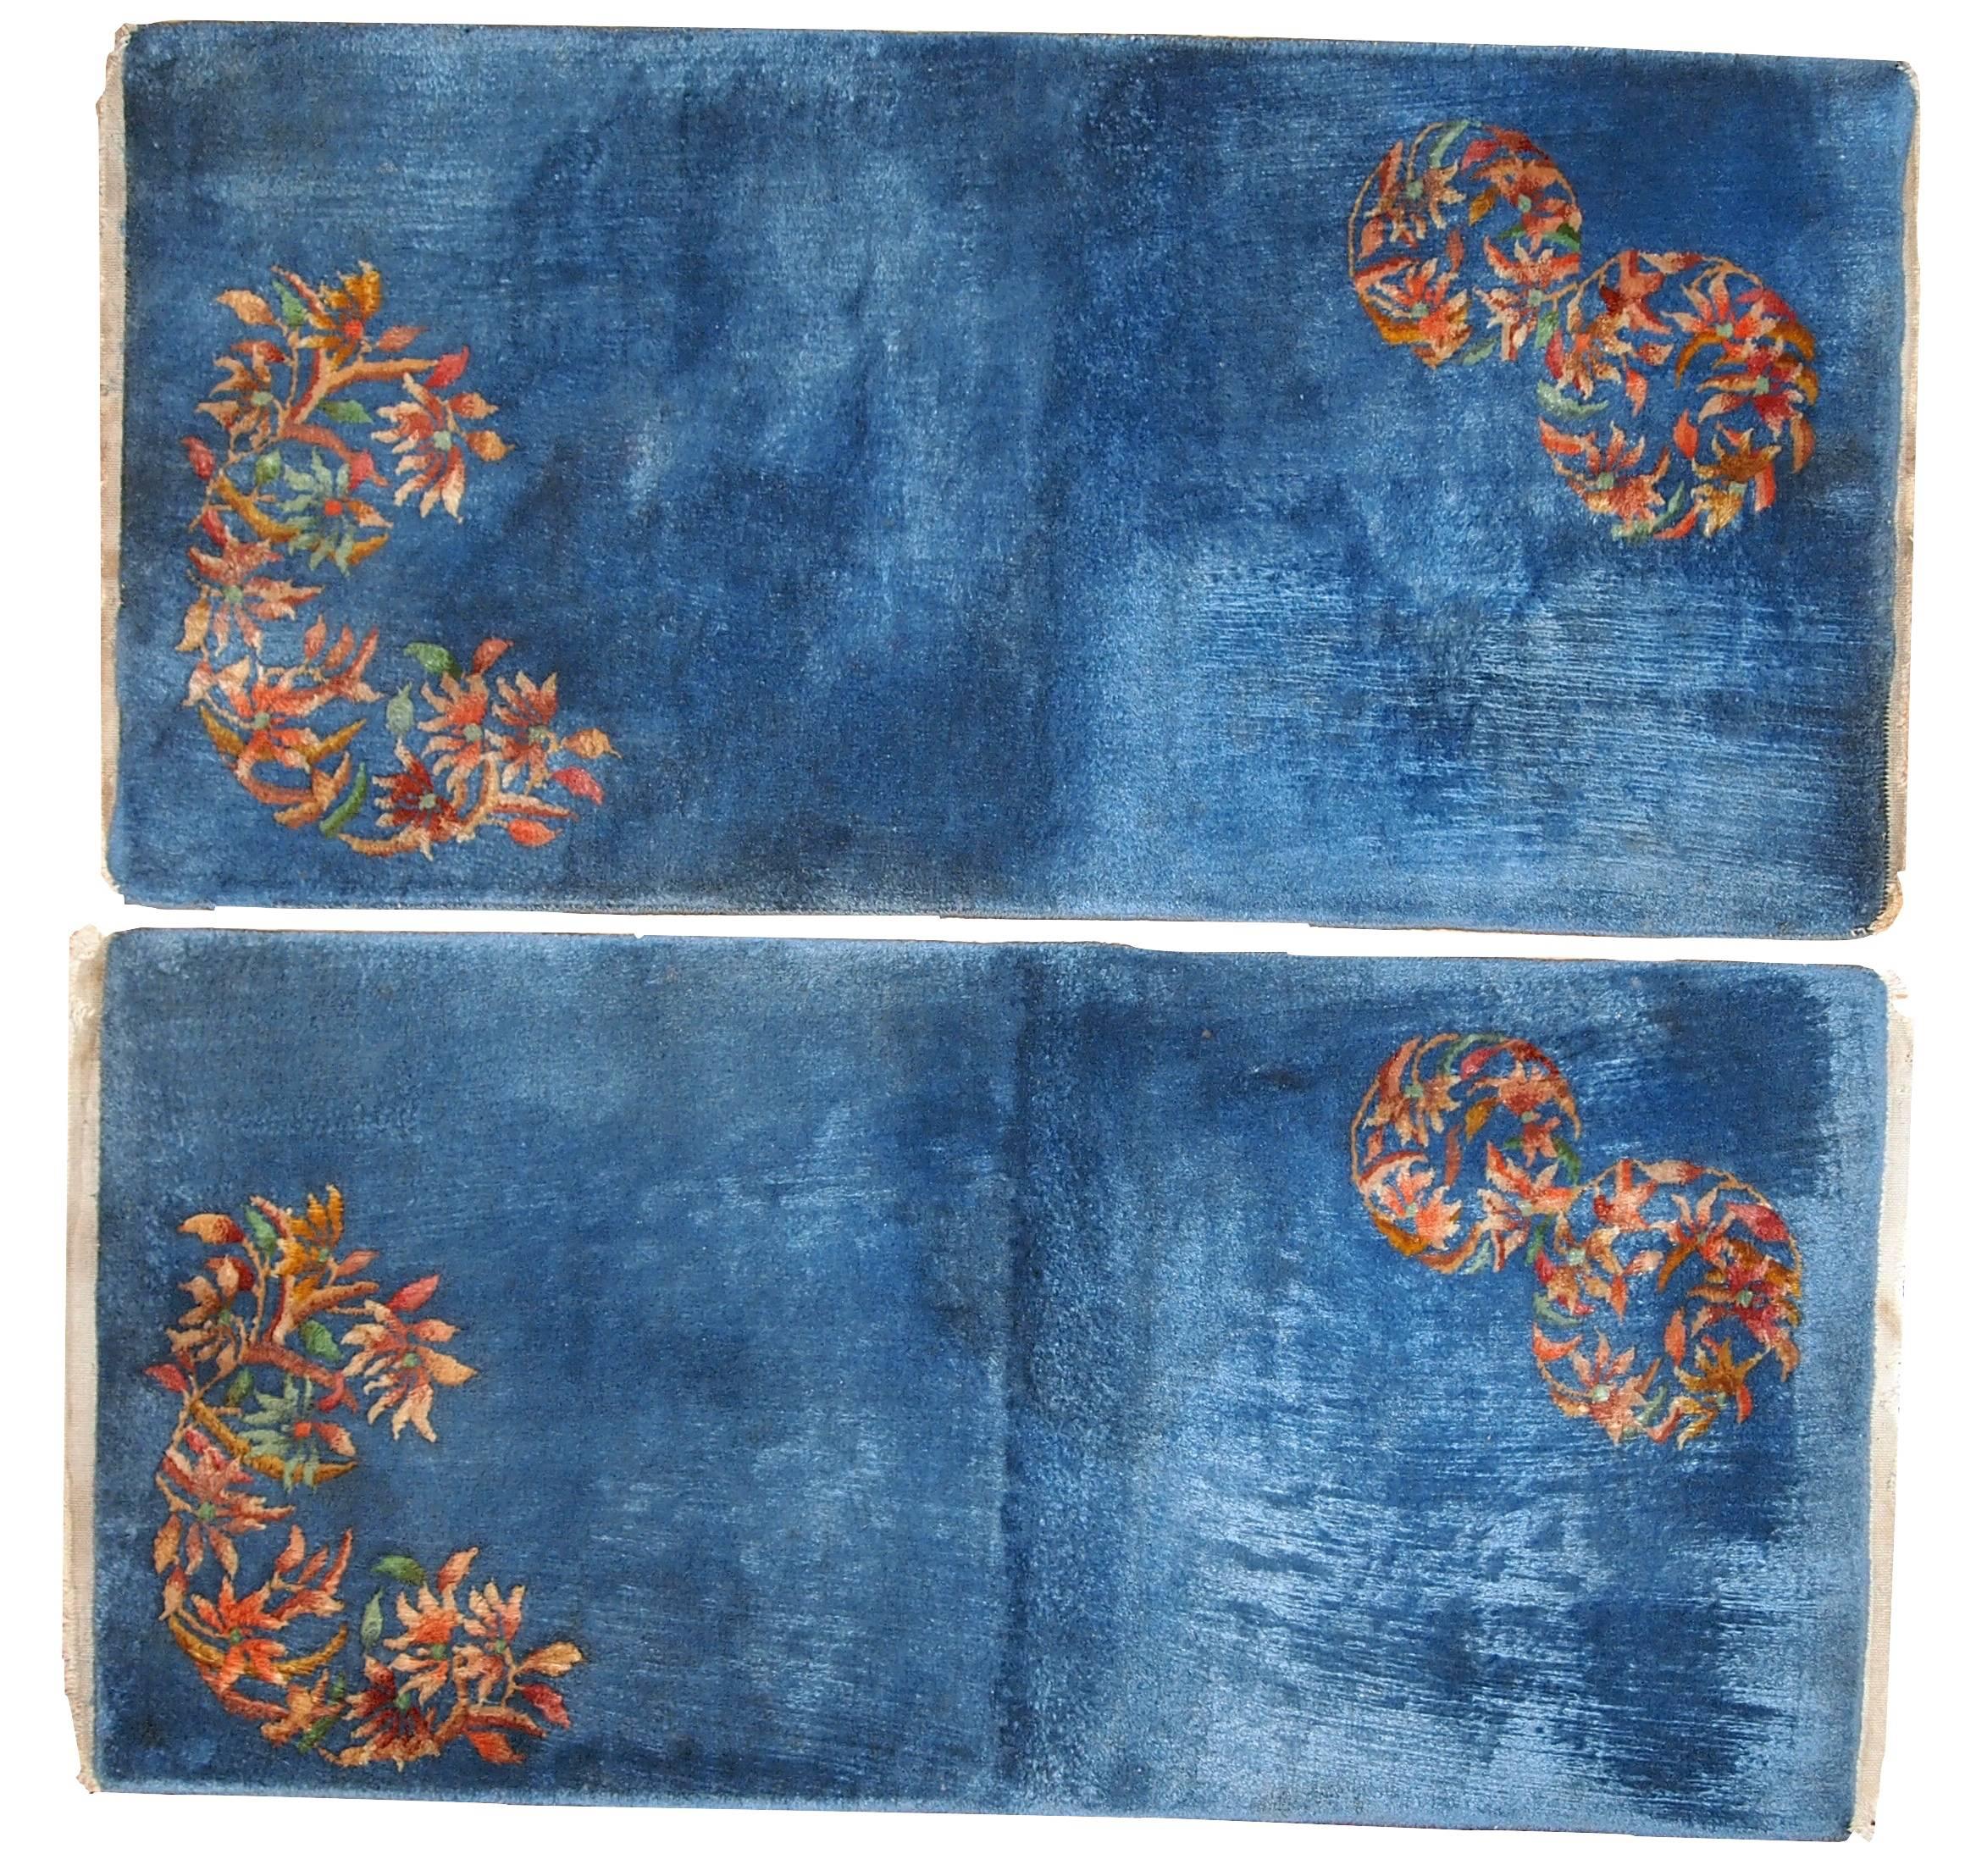 Handmade antique Art Deco Chinese pair of rugs in sky blue color and minimal floral design in the corners of the rug. The colors are very shiny, depends from which side you are looking at the rug. Wool is very soft and pleasant to walk on. The blue